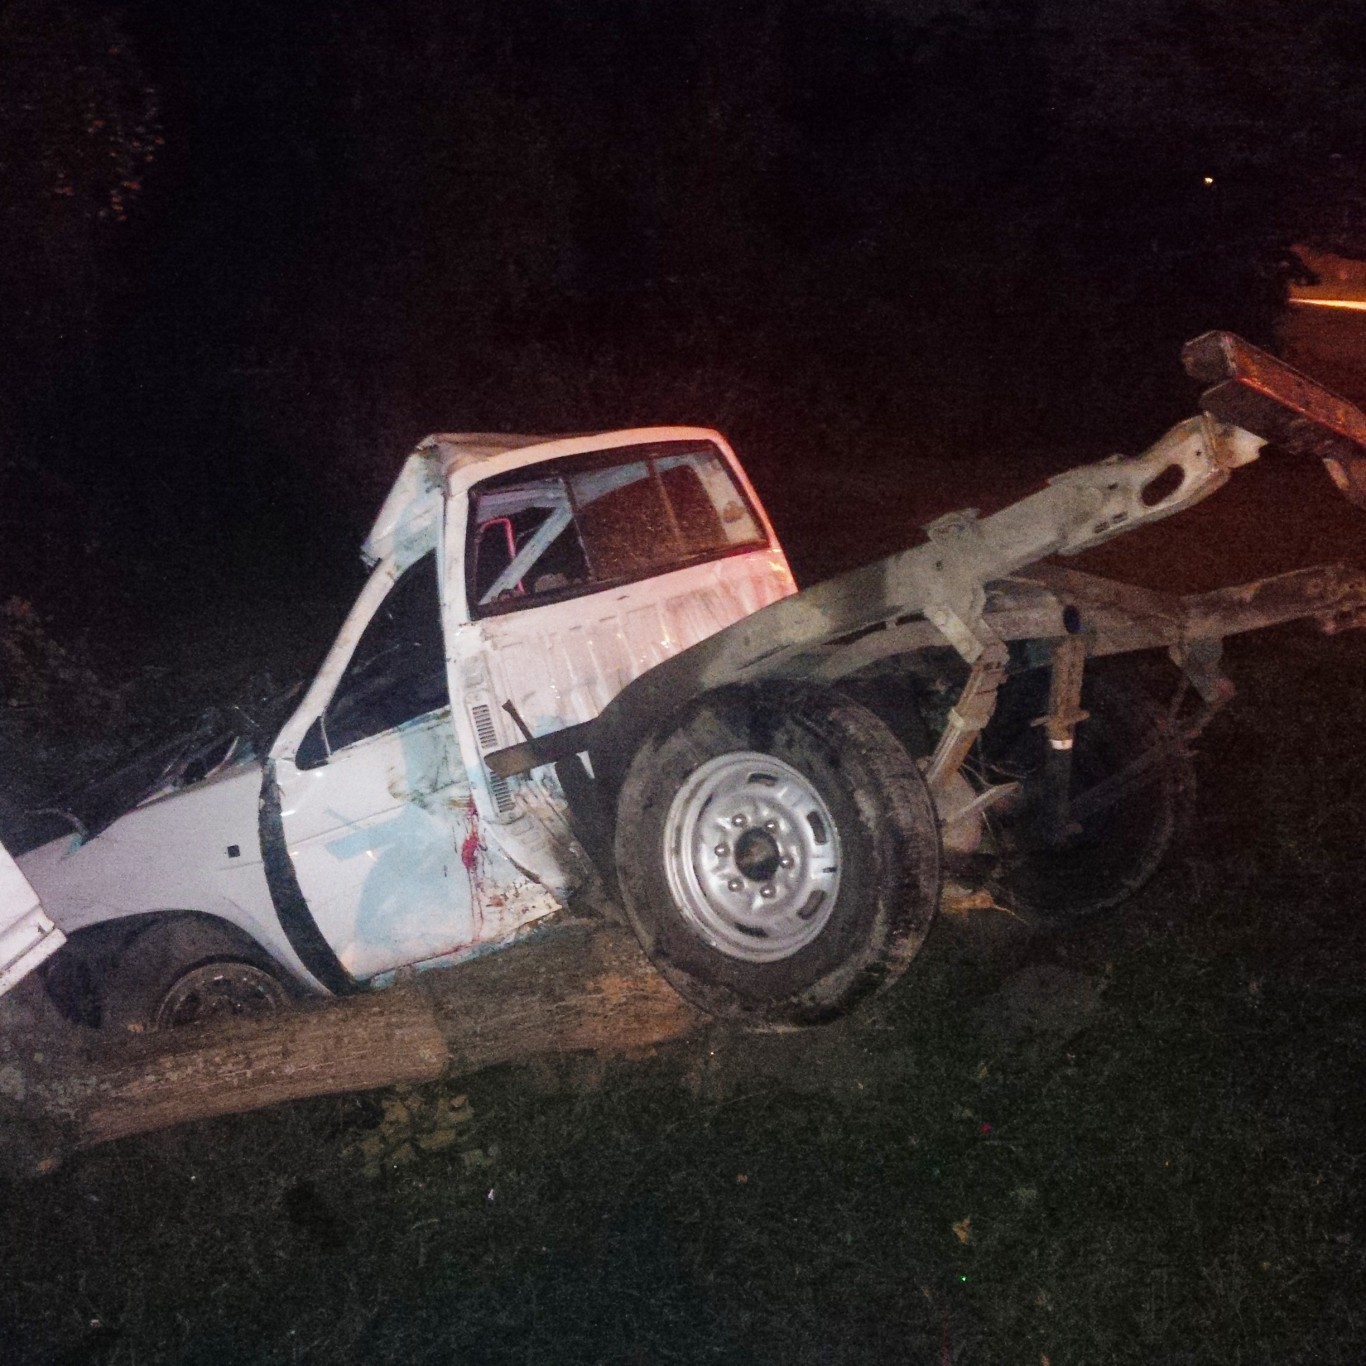 Passenger critically injured after collision with tree, Durban